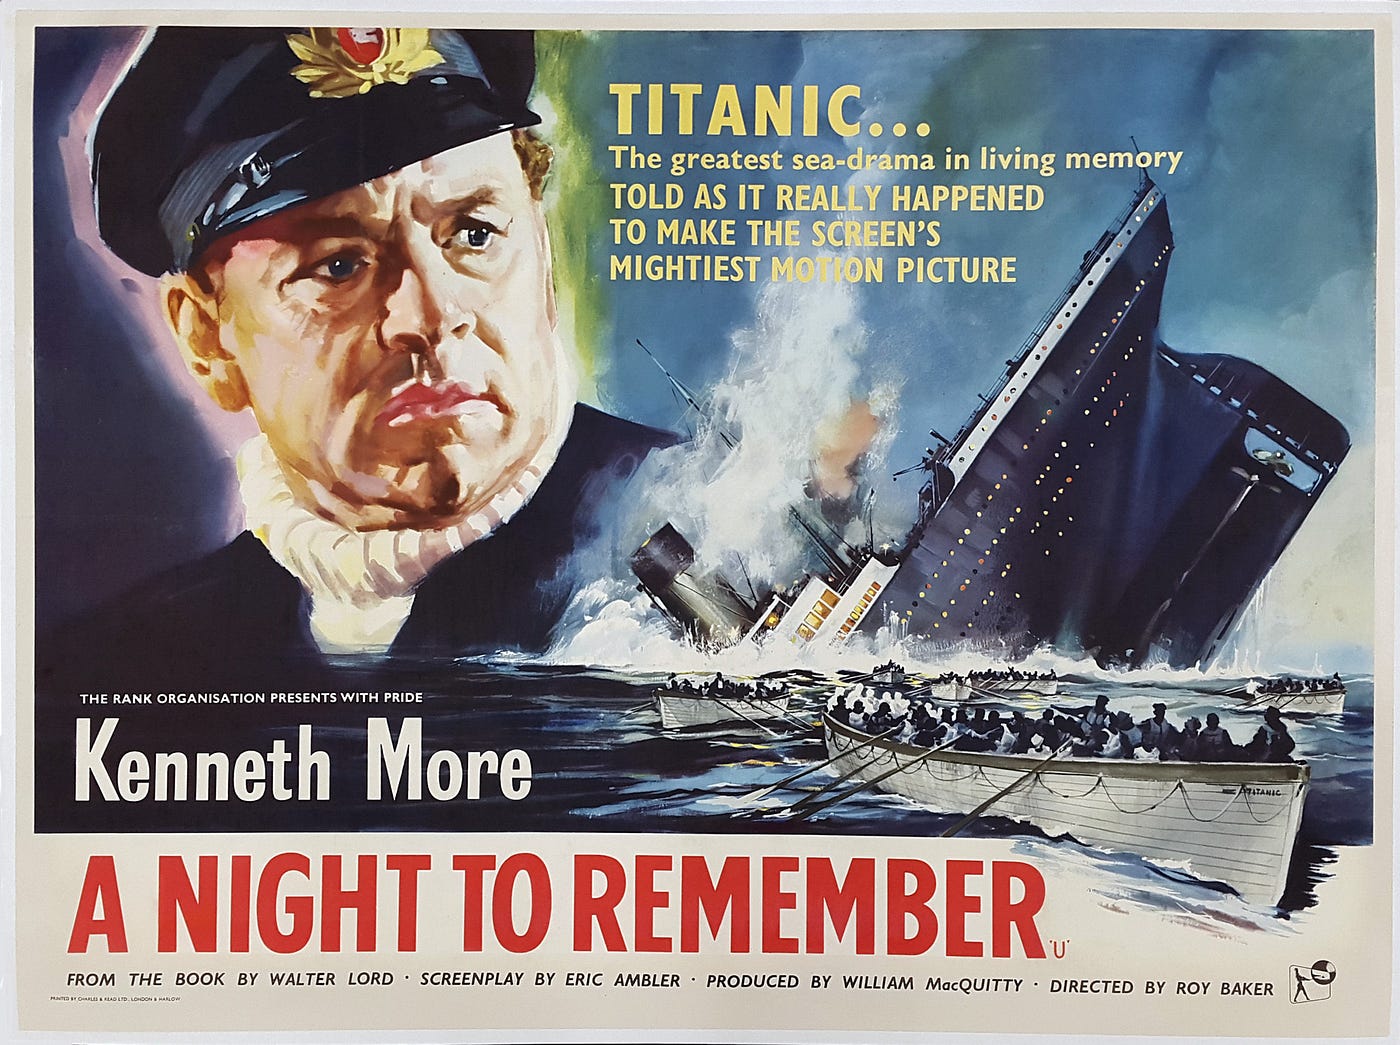 A Night To Remember: A Titanic Film | by Steve Newman Writer | Medium